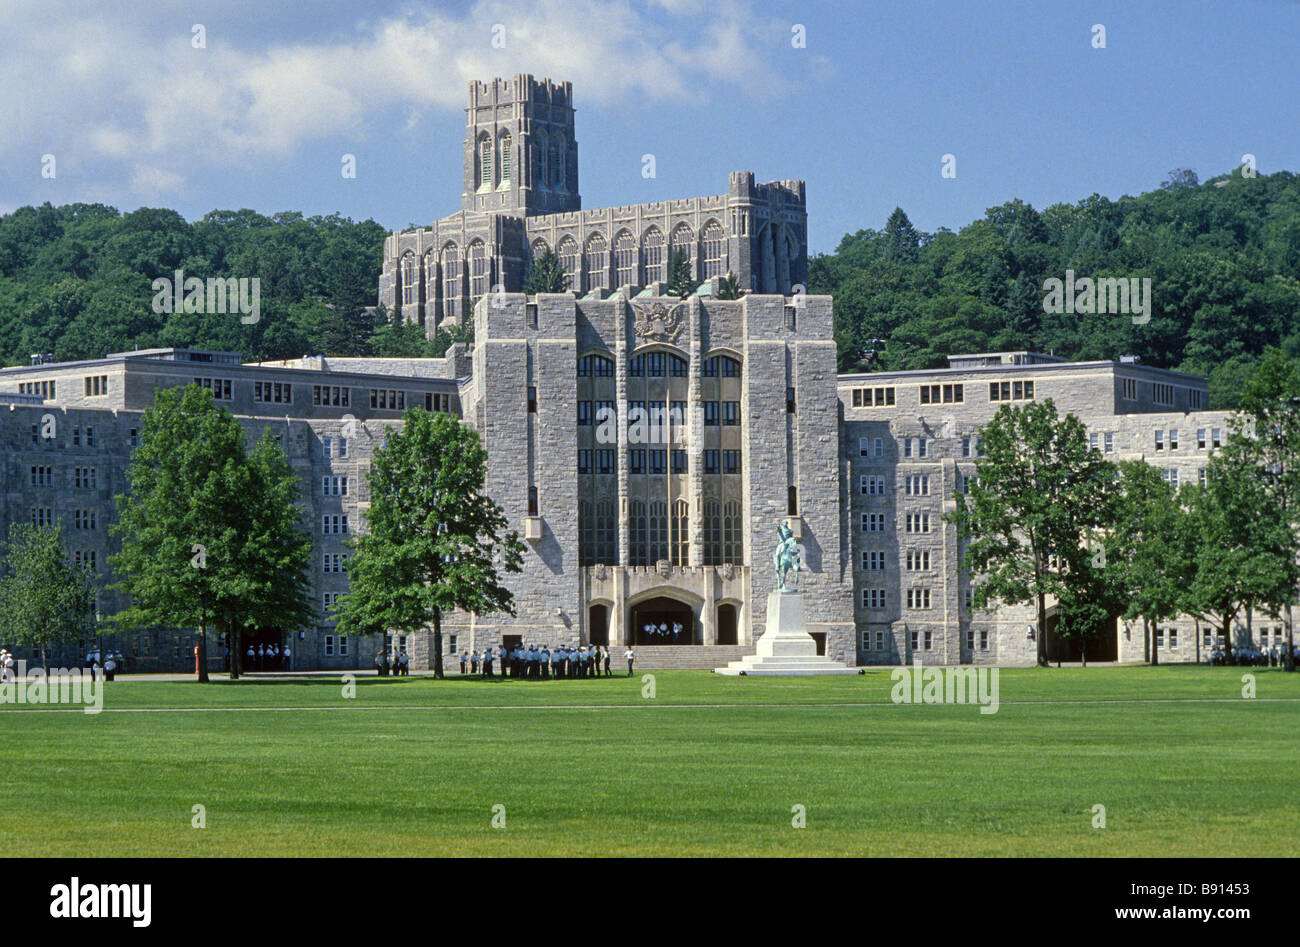 A view of the main buildings and commons and a statue of George Washington at the United States Military Academy West Point, New York. Stock Photo